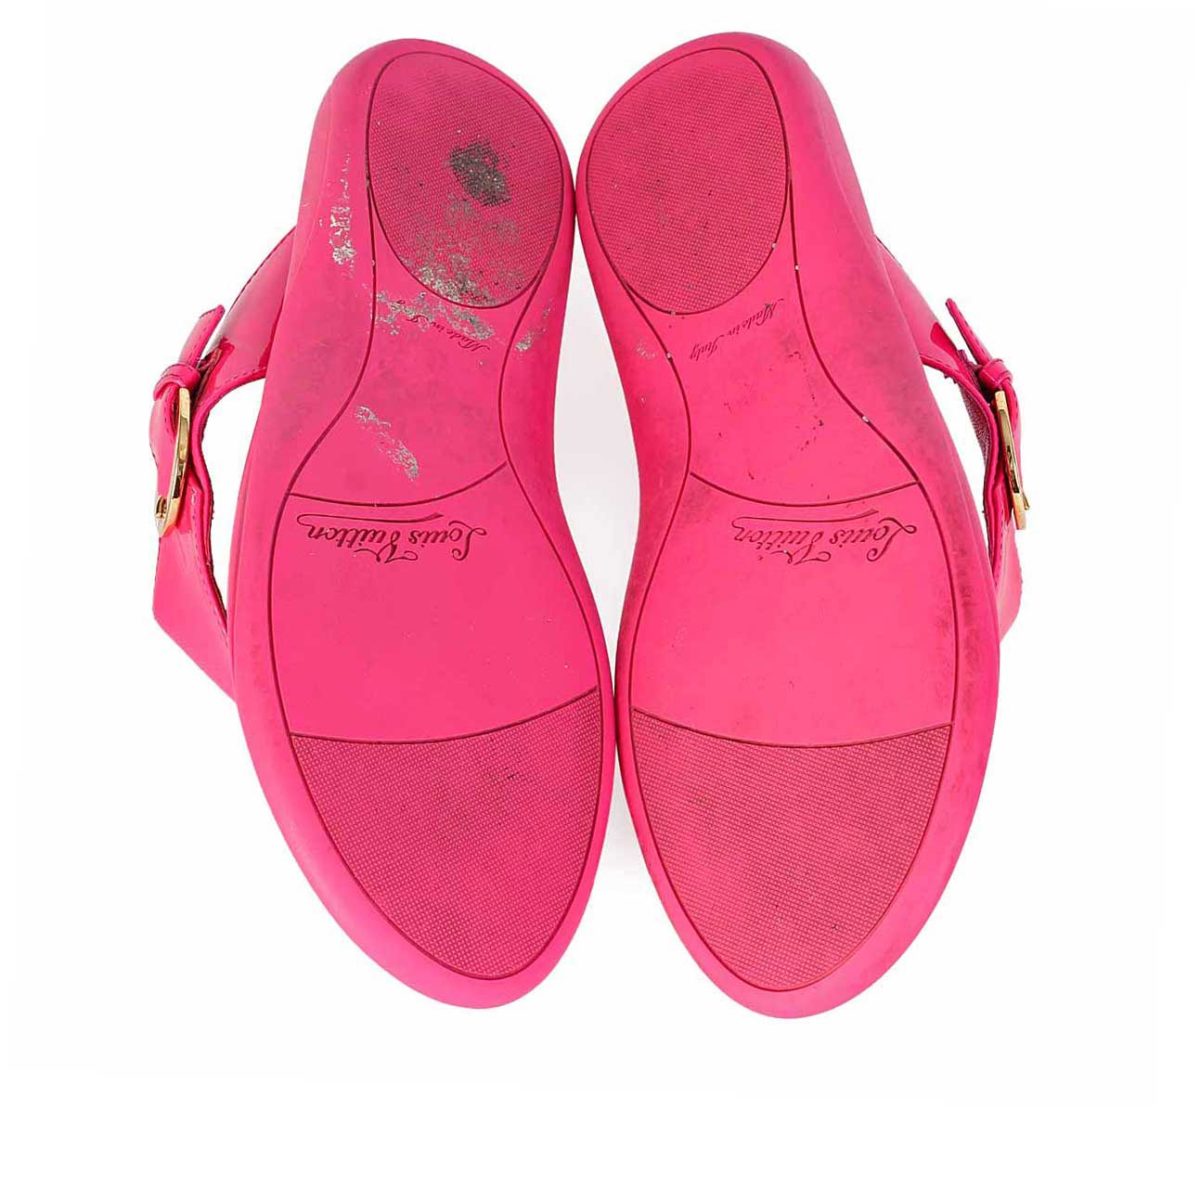 LOUIS VUITTON Hot Pink Patent Leather Thong Slippers - S:36 (3.5) - Luxity